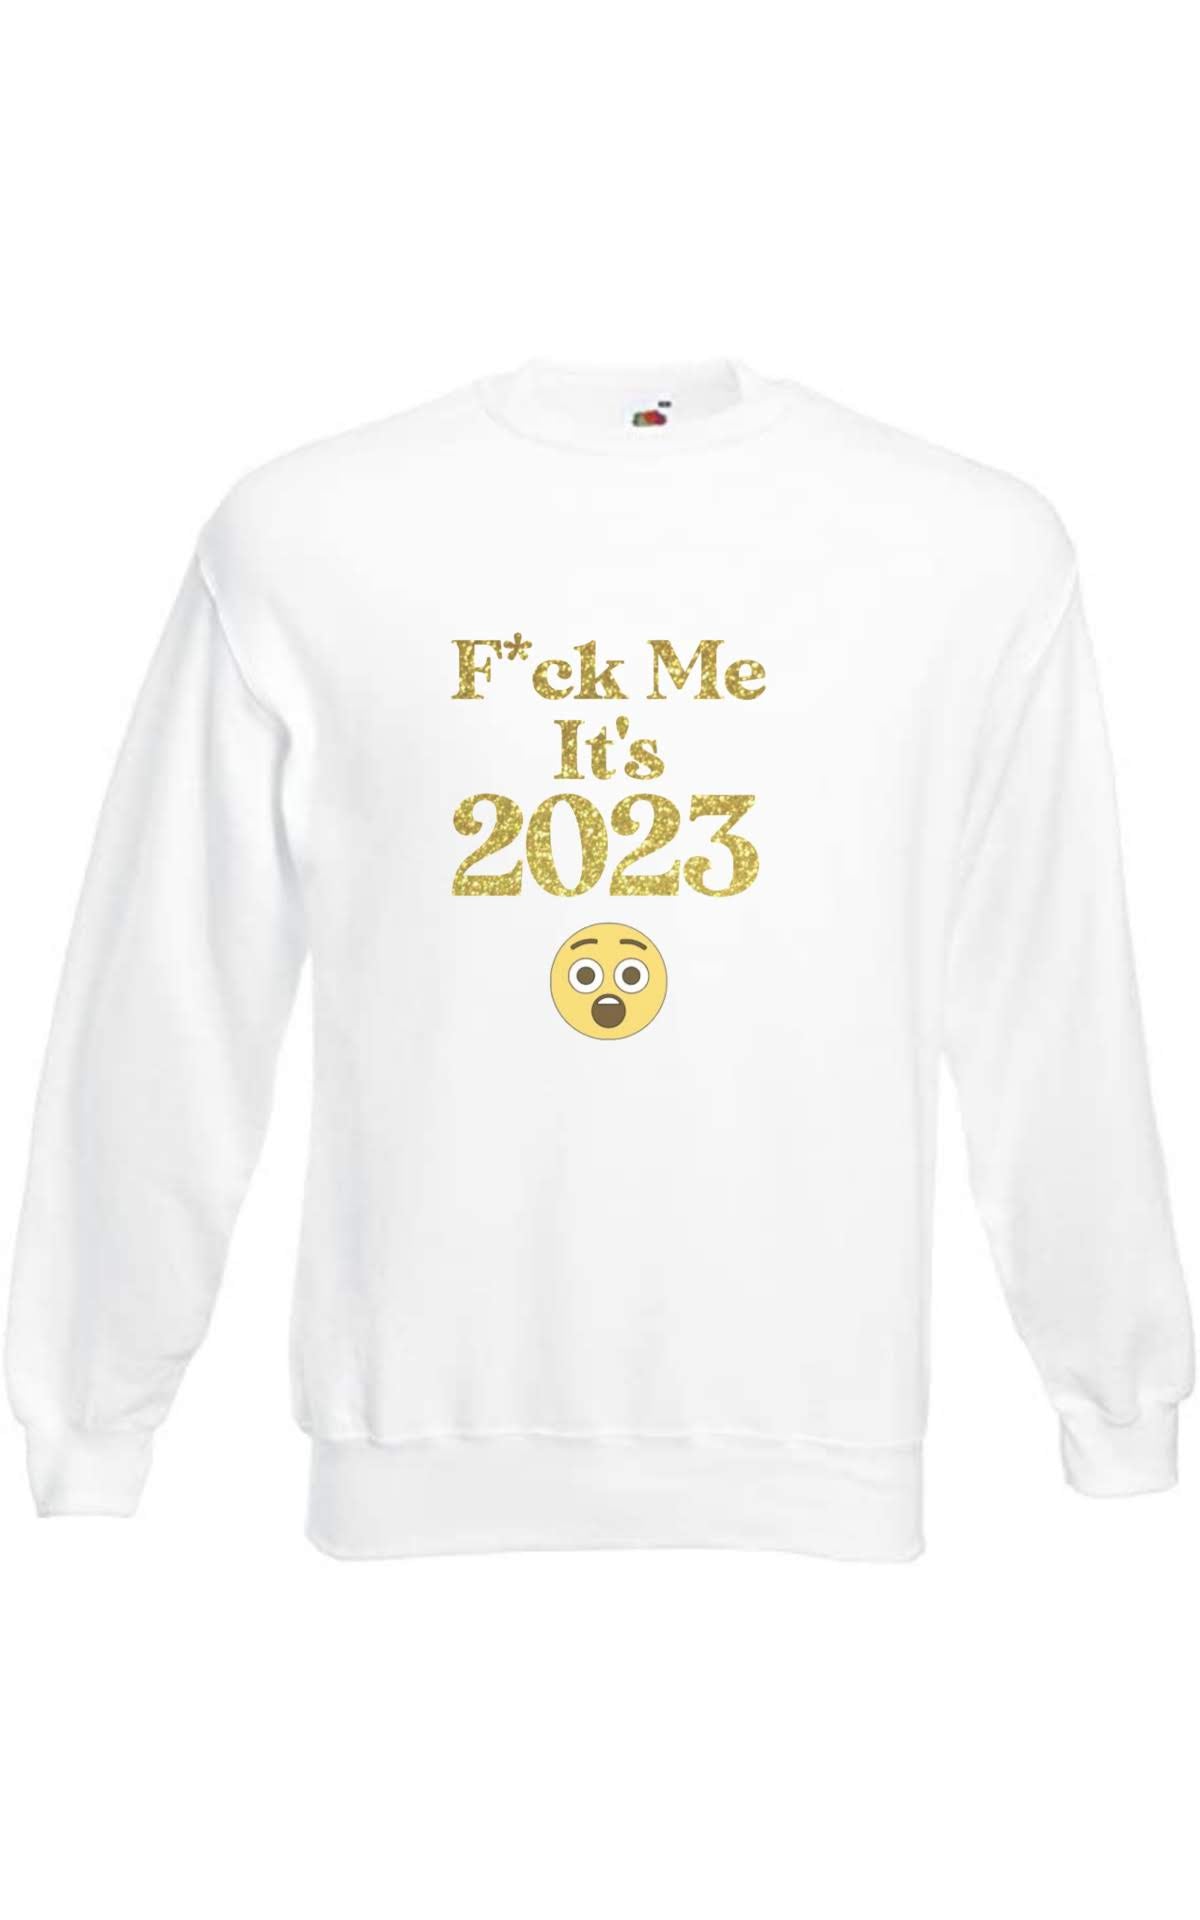 F*CK ME IT's 2023 T-shirt - Limited Edition!